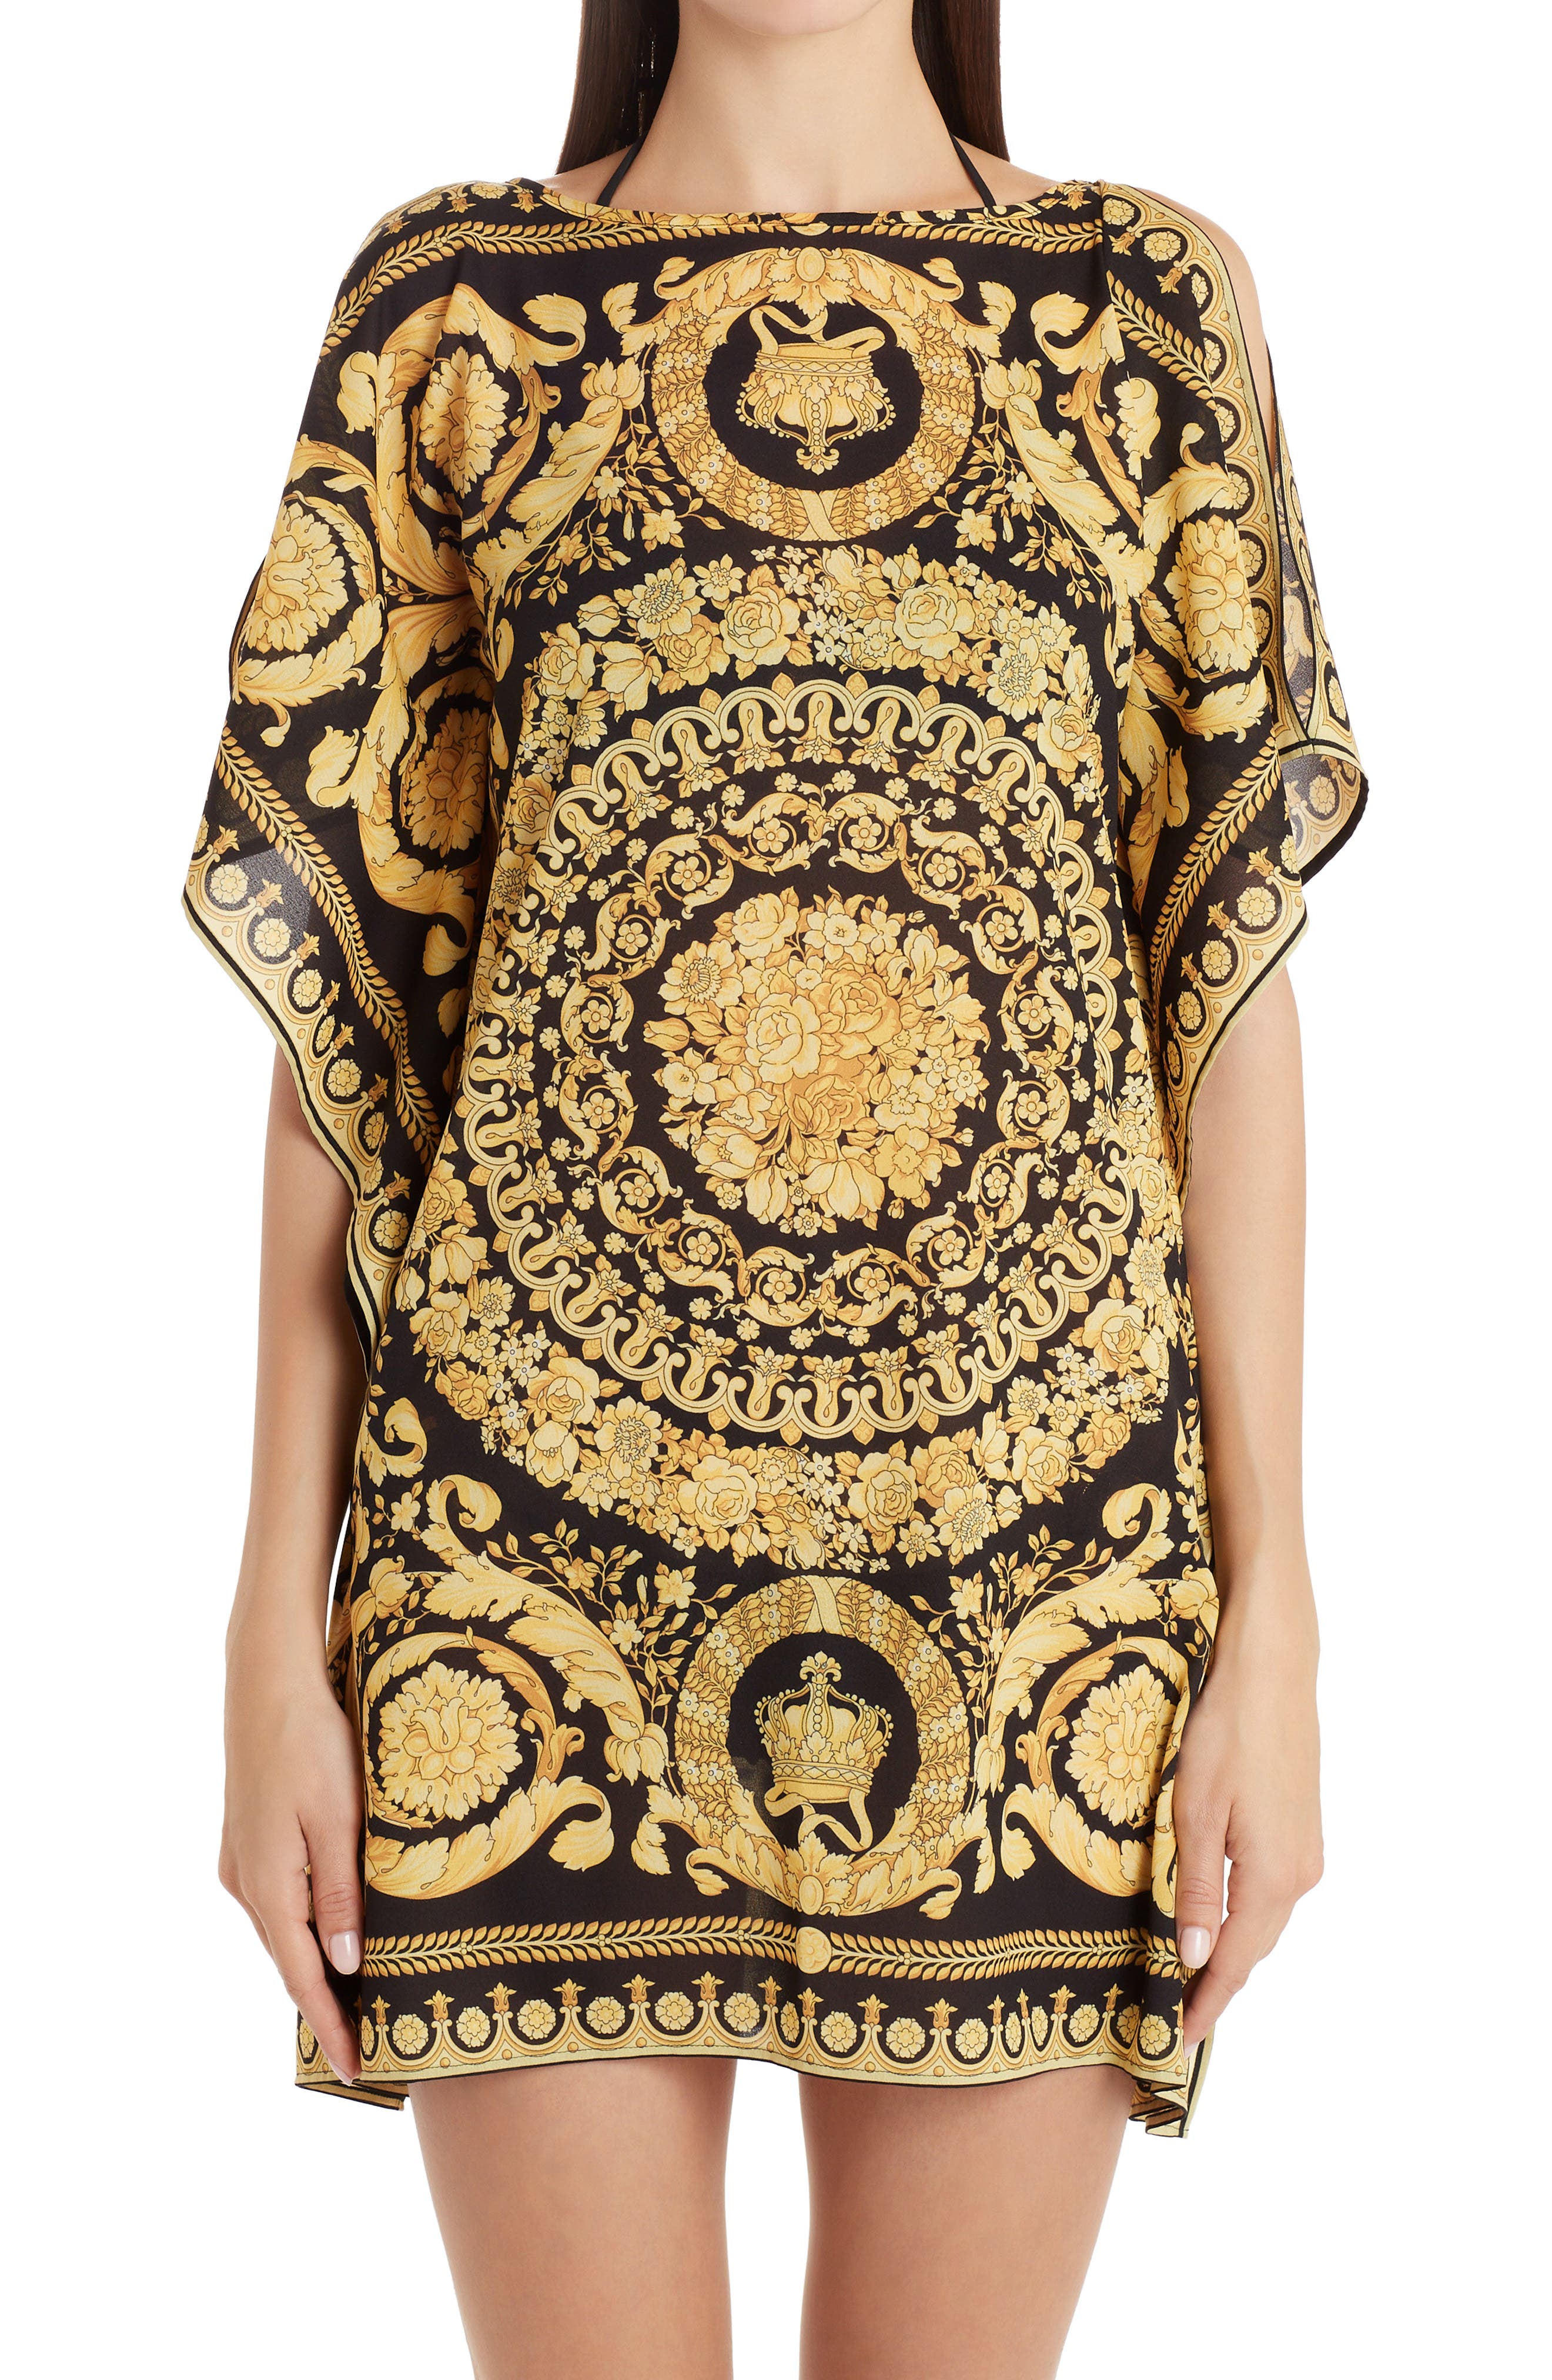 versace inspired clothing